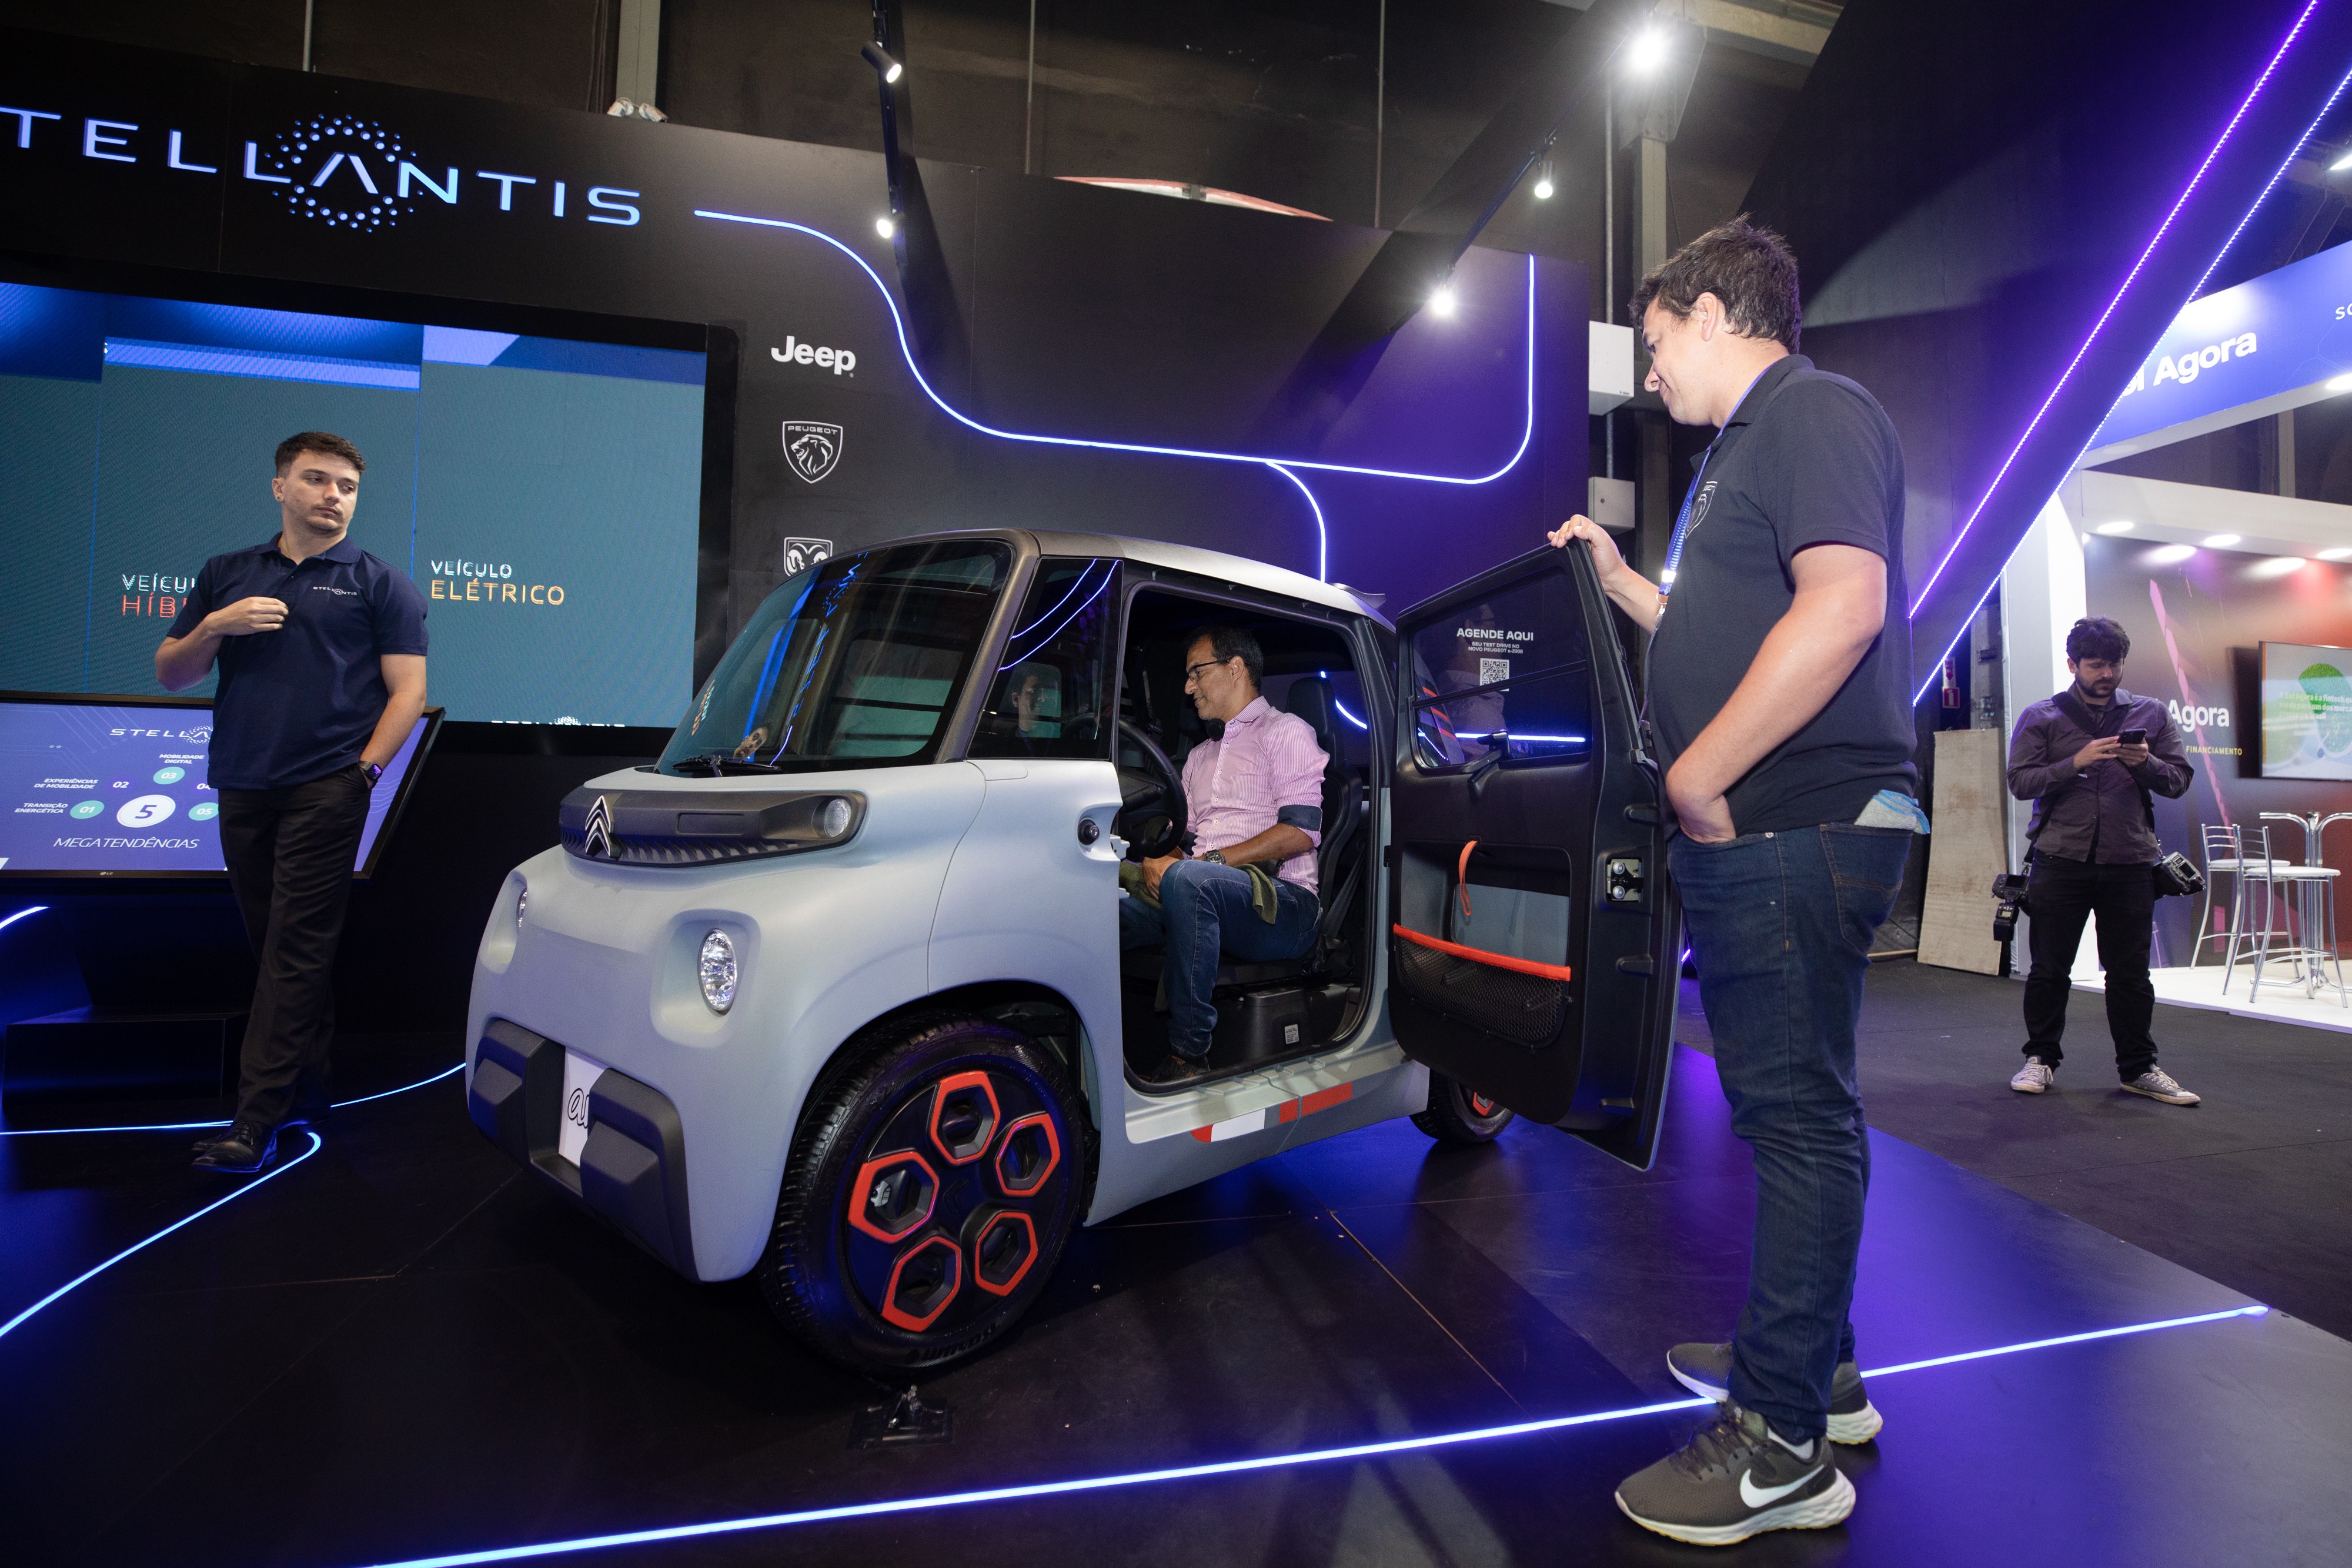 Visitors experience an electric car at Rio Innovation Week in Rio de Janeiro, Brazil, on Nov. 8, 2022. The four-day Rio Innovation Week opened in Rio de Janeiro on Tuesday.